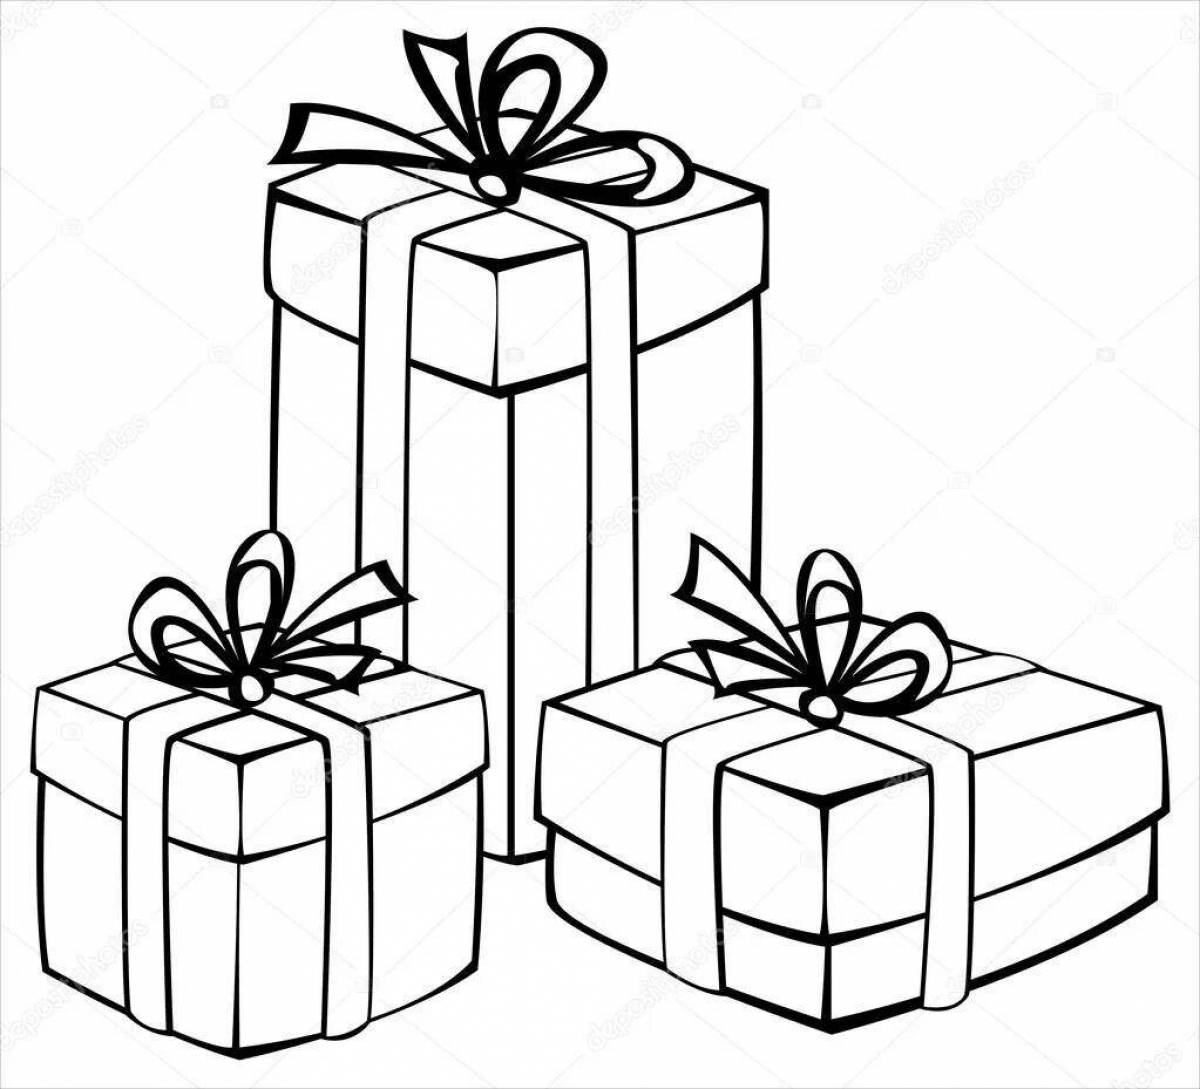 Shining Great Gift coloring page